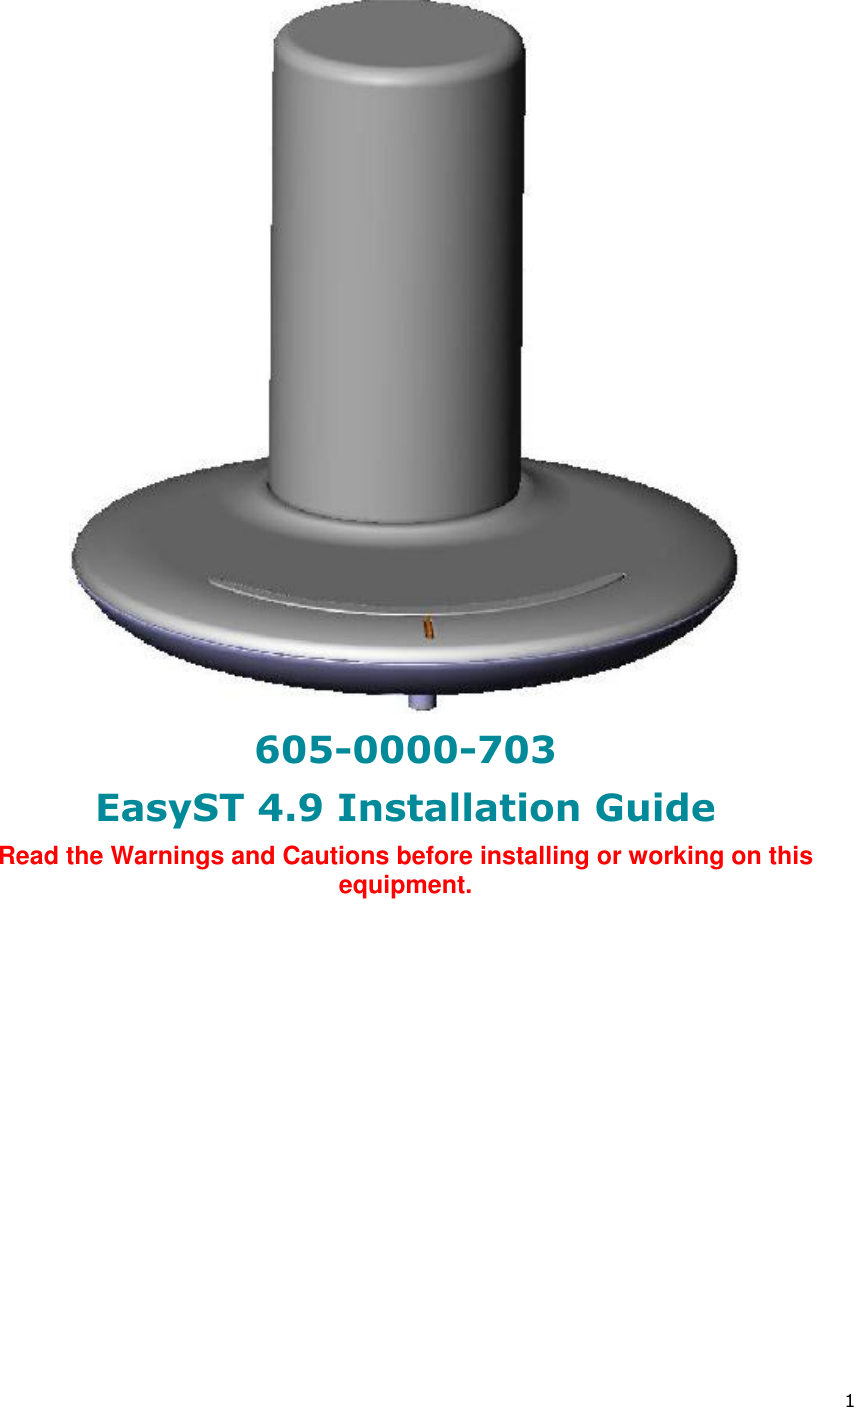  1  605-0000-703 EasyST 4.9 Installation Guide Read the Warnings and Cautions before installing or working on this equipment.  